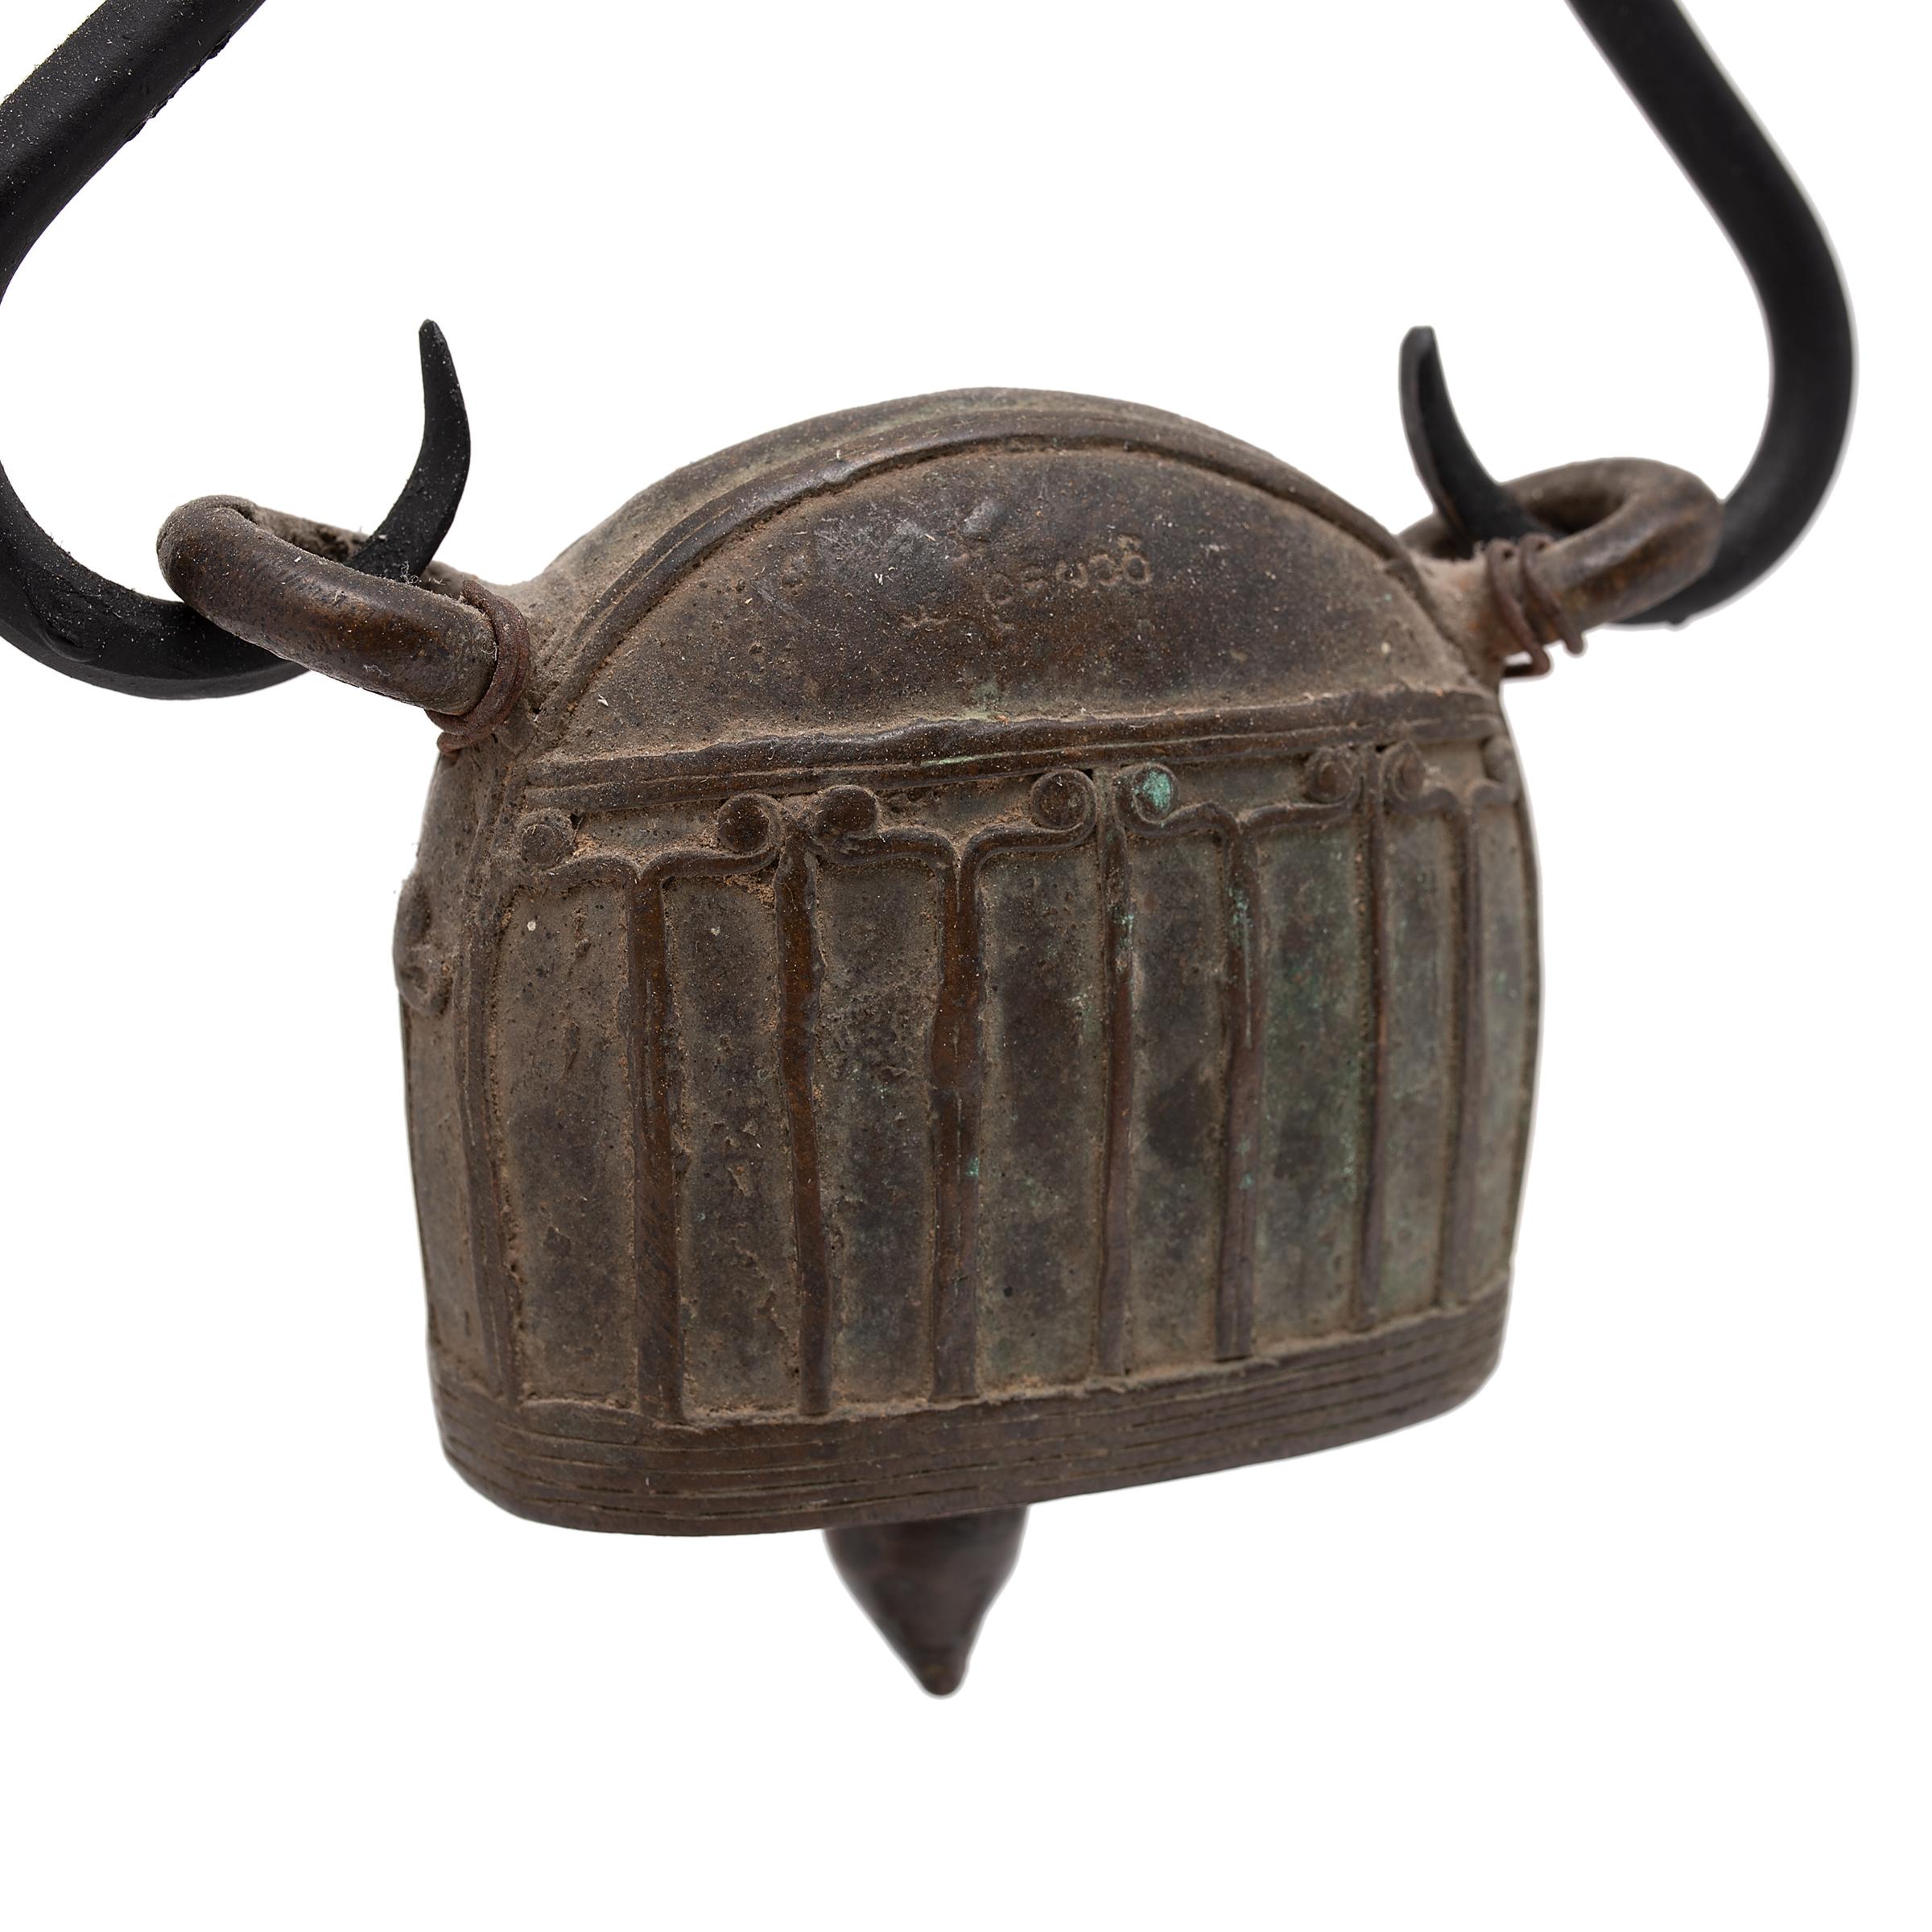 This large Burmese bell is known as hka-lauk and was used to track the movement of a livestock animal, strung from a collar by the two loops at the top. Dated to the 19th century, the bell was cast of bronze using the lost wax method with a